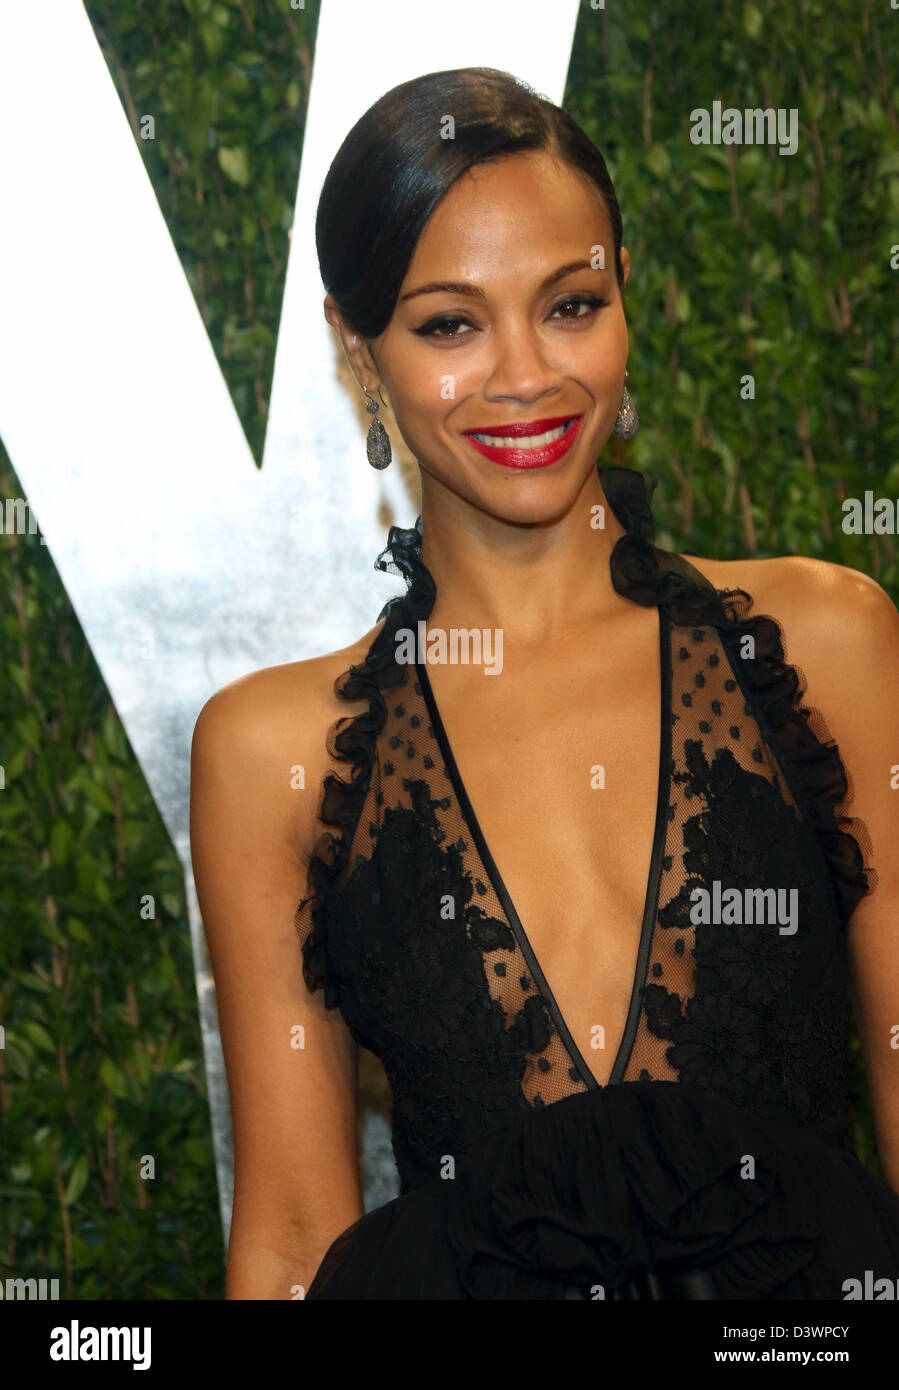 Actress Zoe Saldana arrives at the Vanity Fair Oscar Party at Sunset Tower in West Hollywood, Los Angeles, USA, on 24 February 2013. Photo: Hubert Boesl Stock Photo